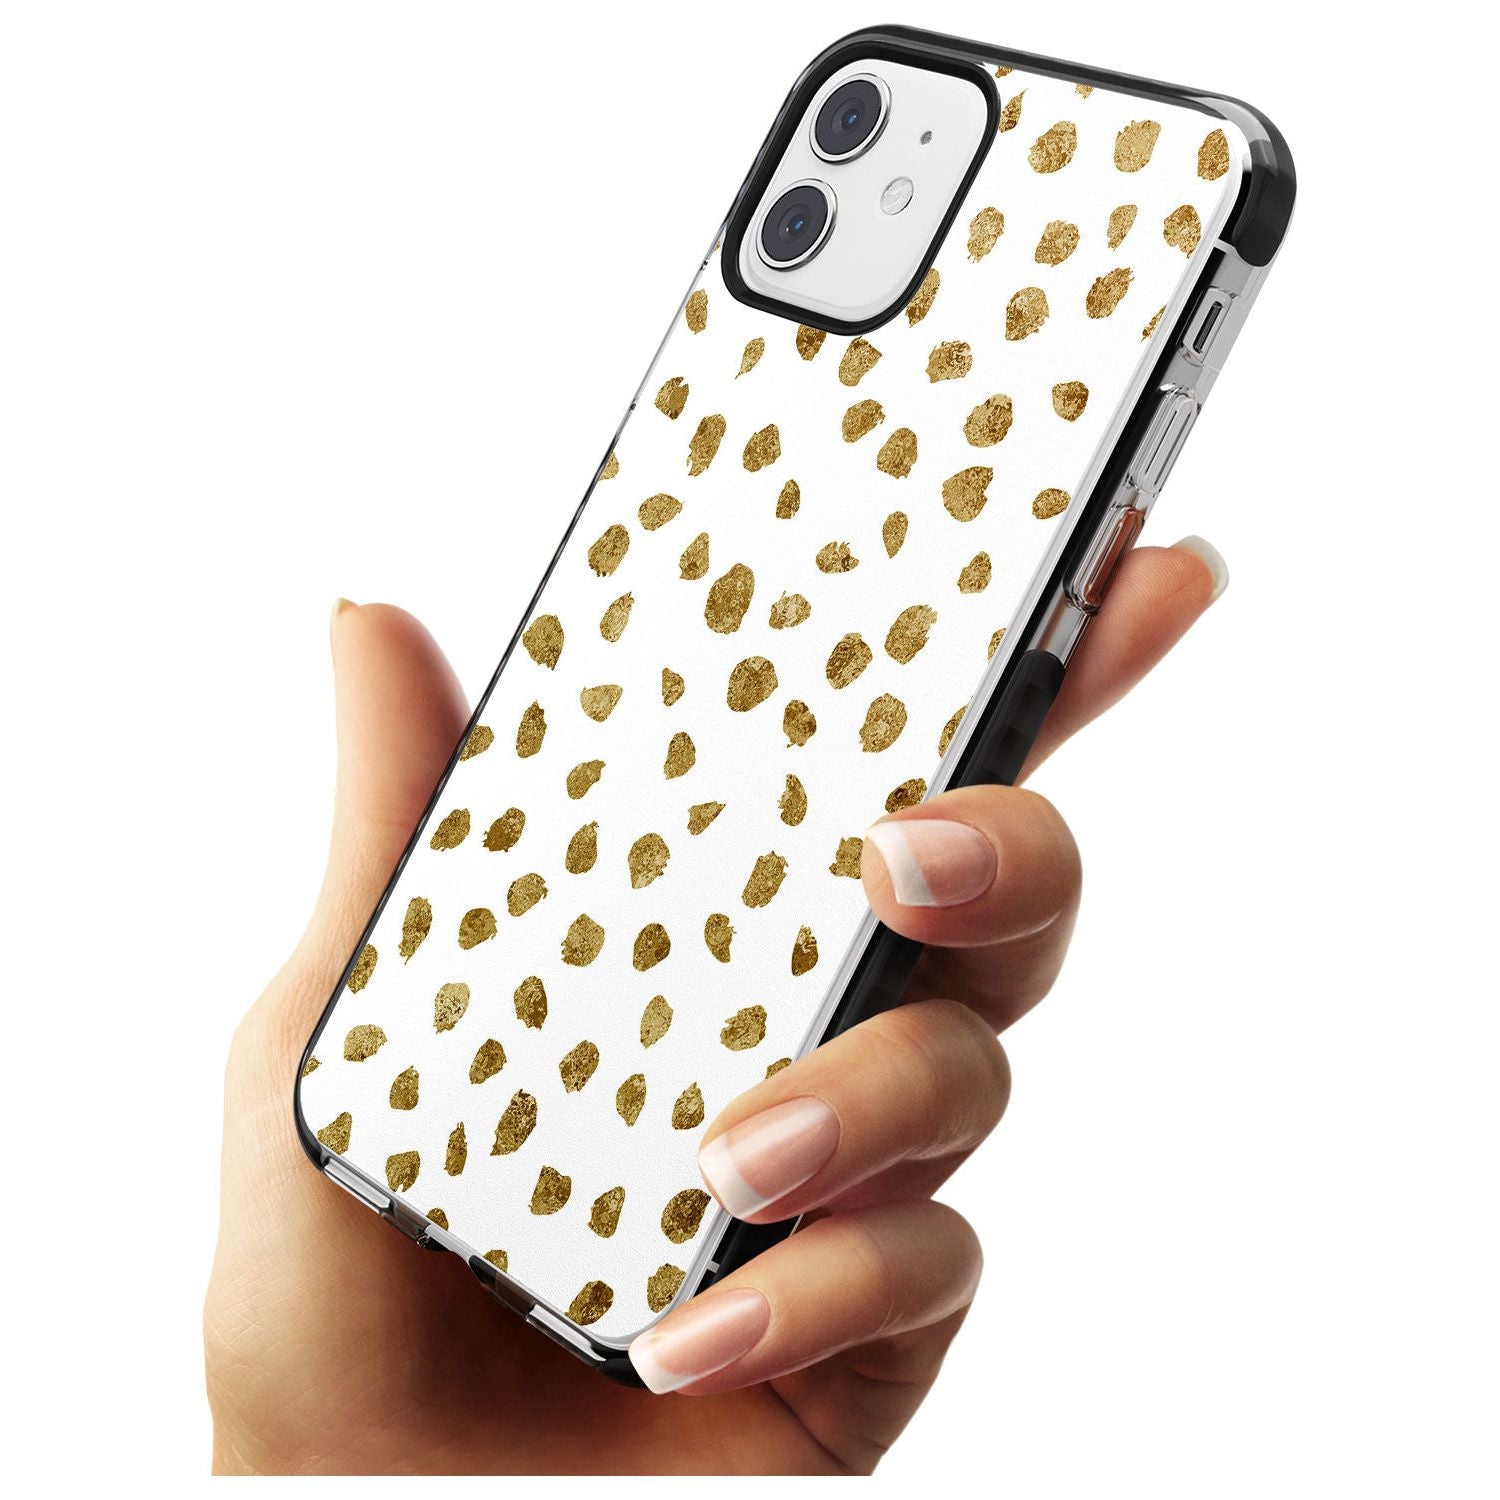 Gold Look on White Dalmatian Polka Dot Spots Black Impact Phone Case for iPhone 11